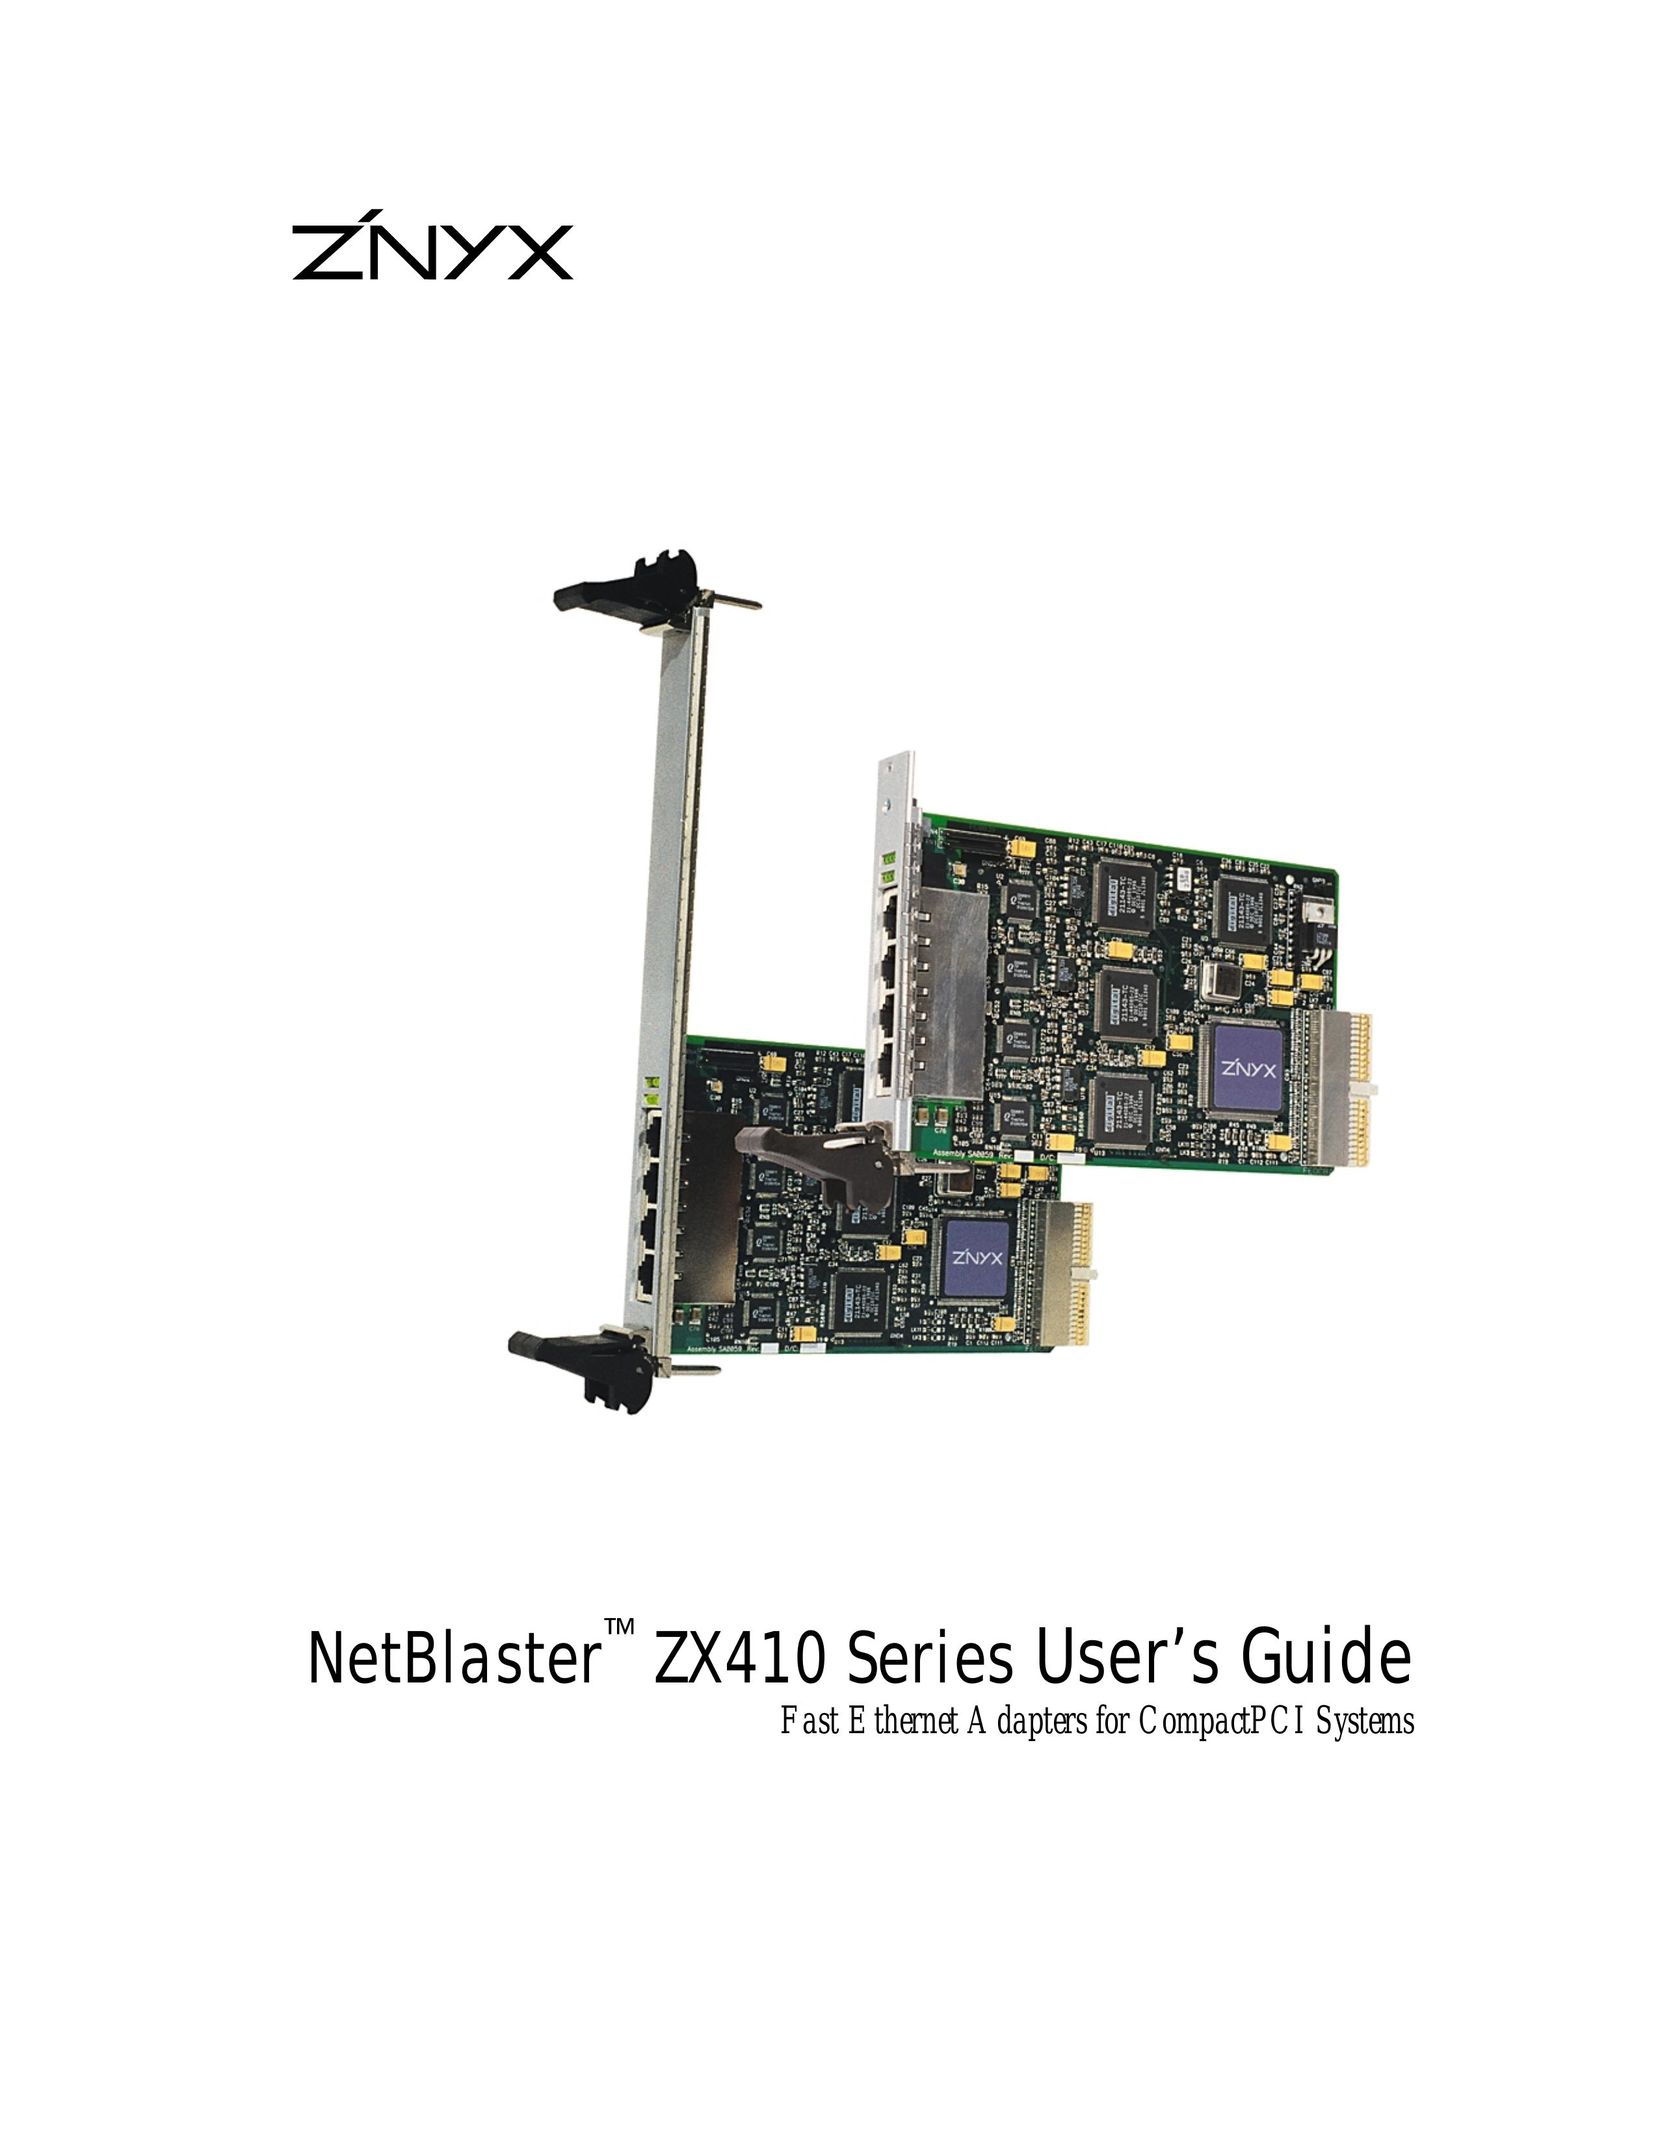 Znyx Networks ZX410 Network Card User Manual